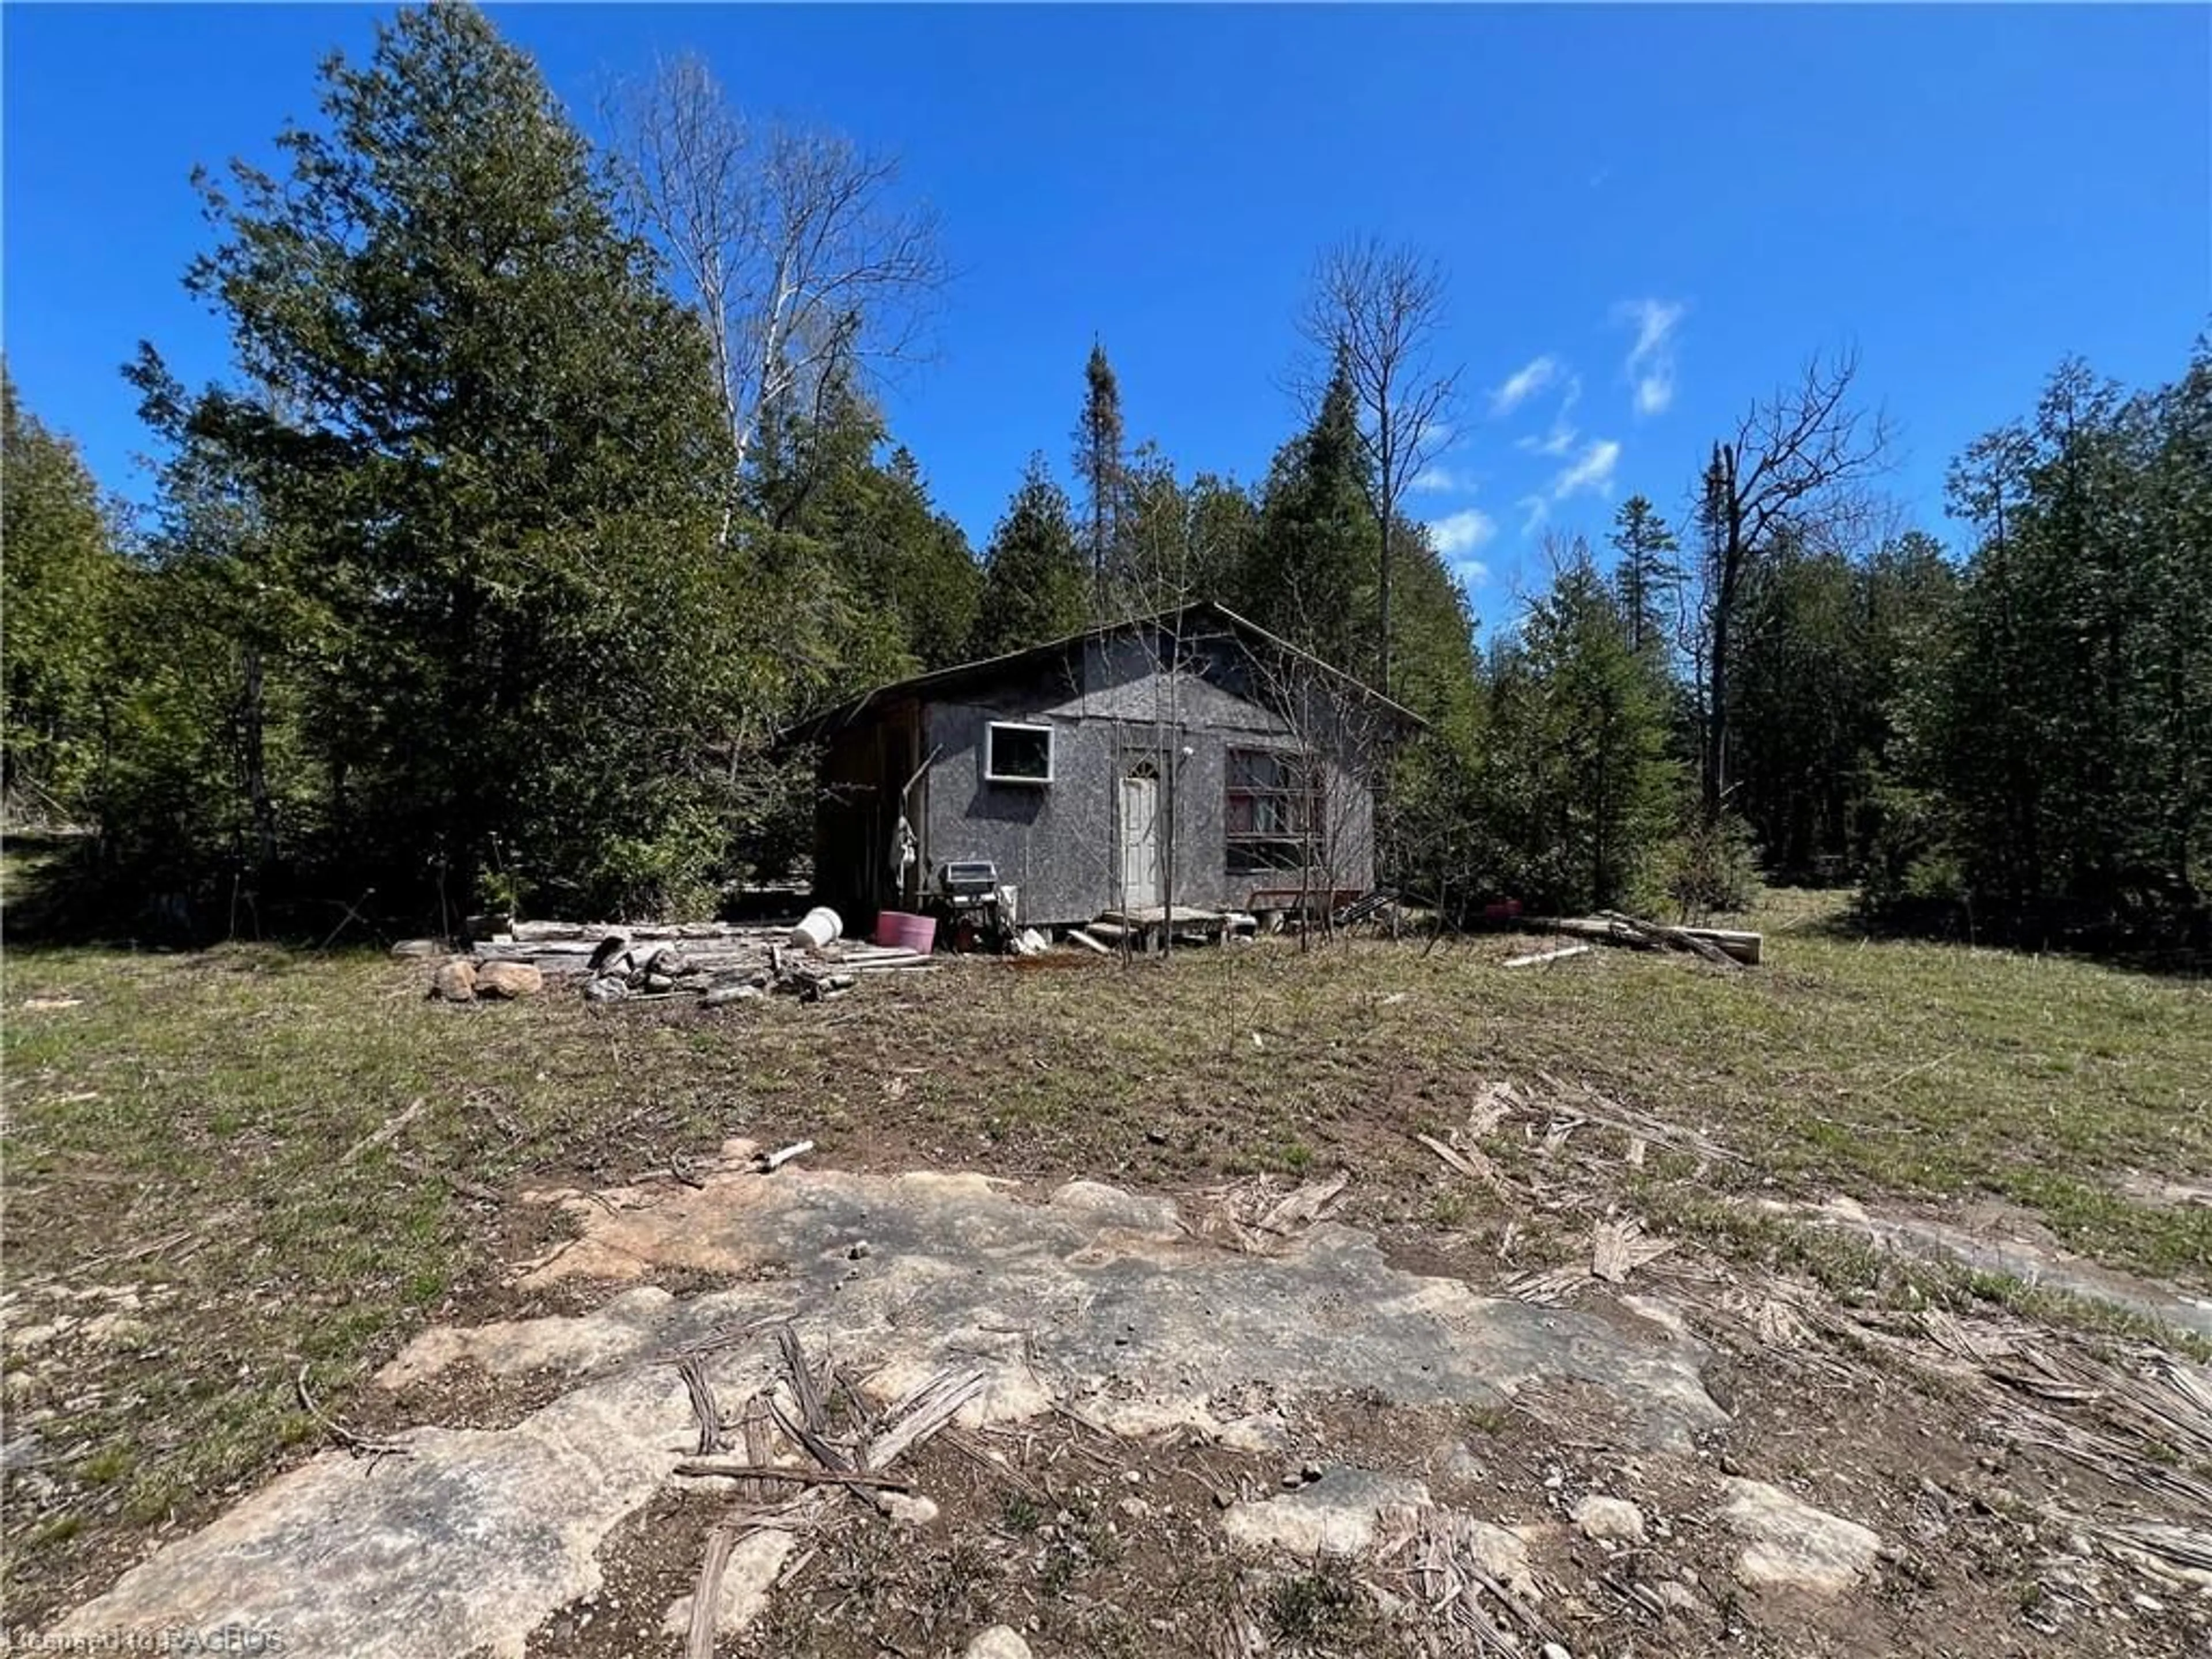 Cottage for LOT 32 CON 3 Highway 6, South Bruce Peninsula Ontario N0H 2T0